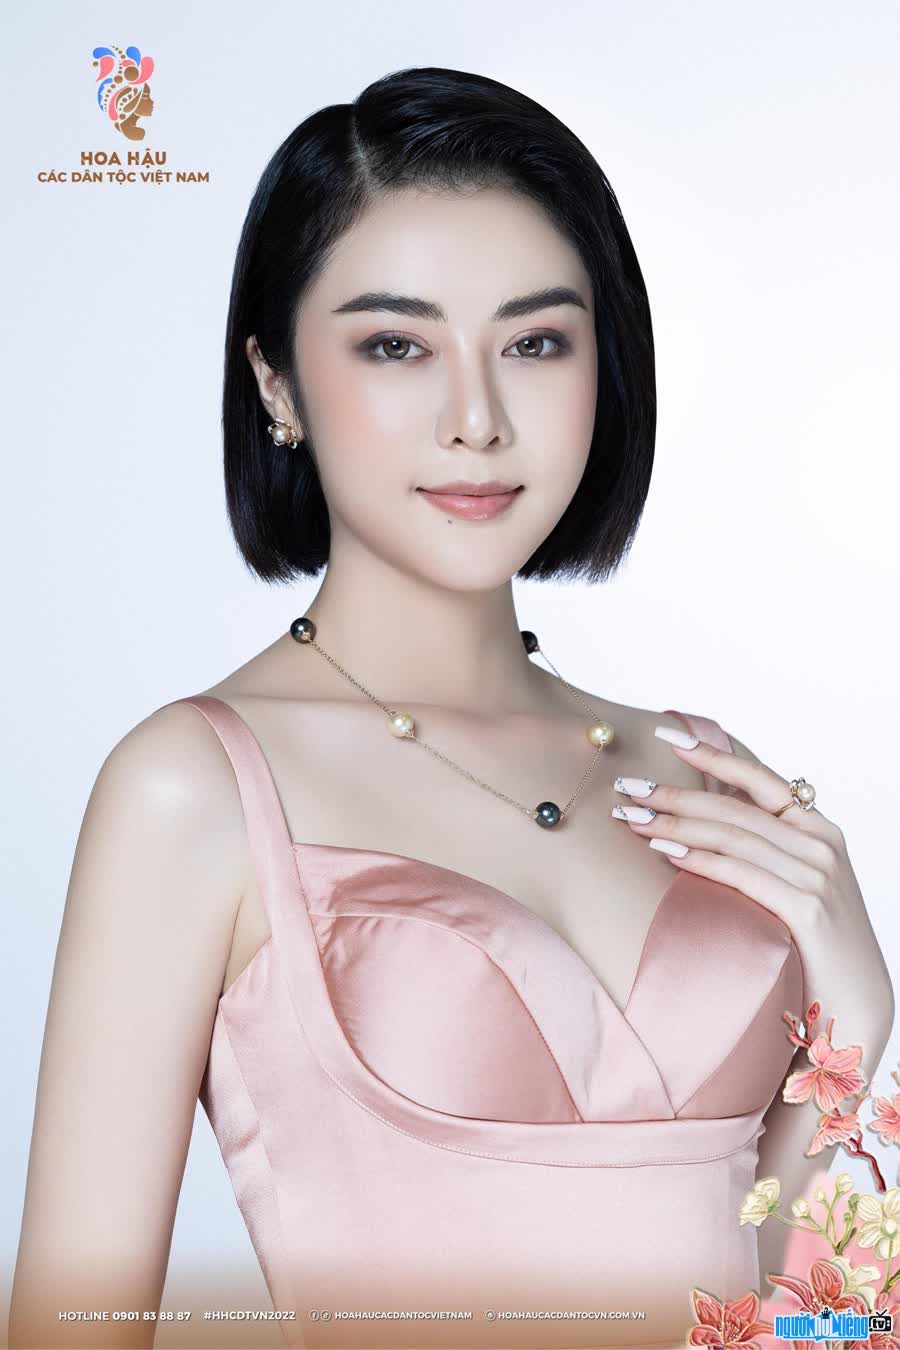 Hong Diem is a contestant of the "Miss Ethnic Vietnam 2022" contest